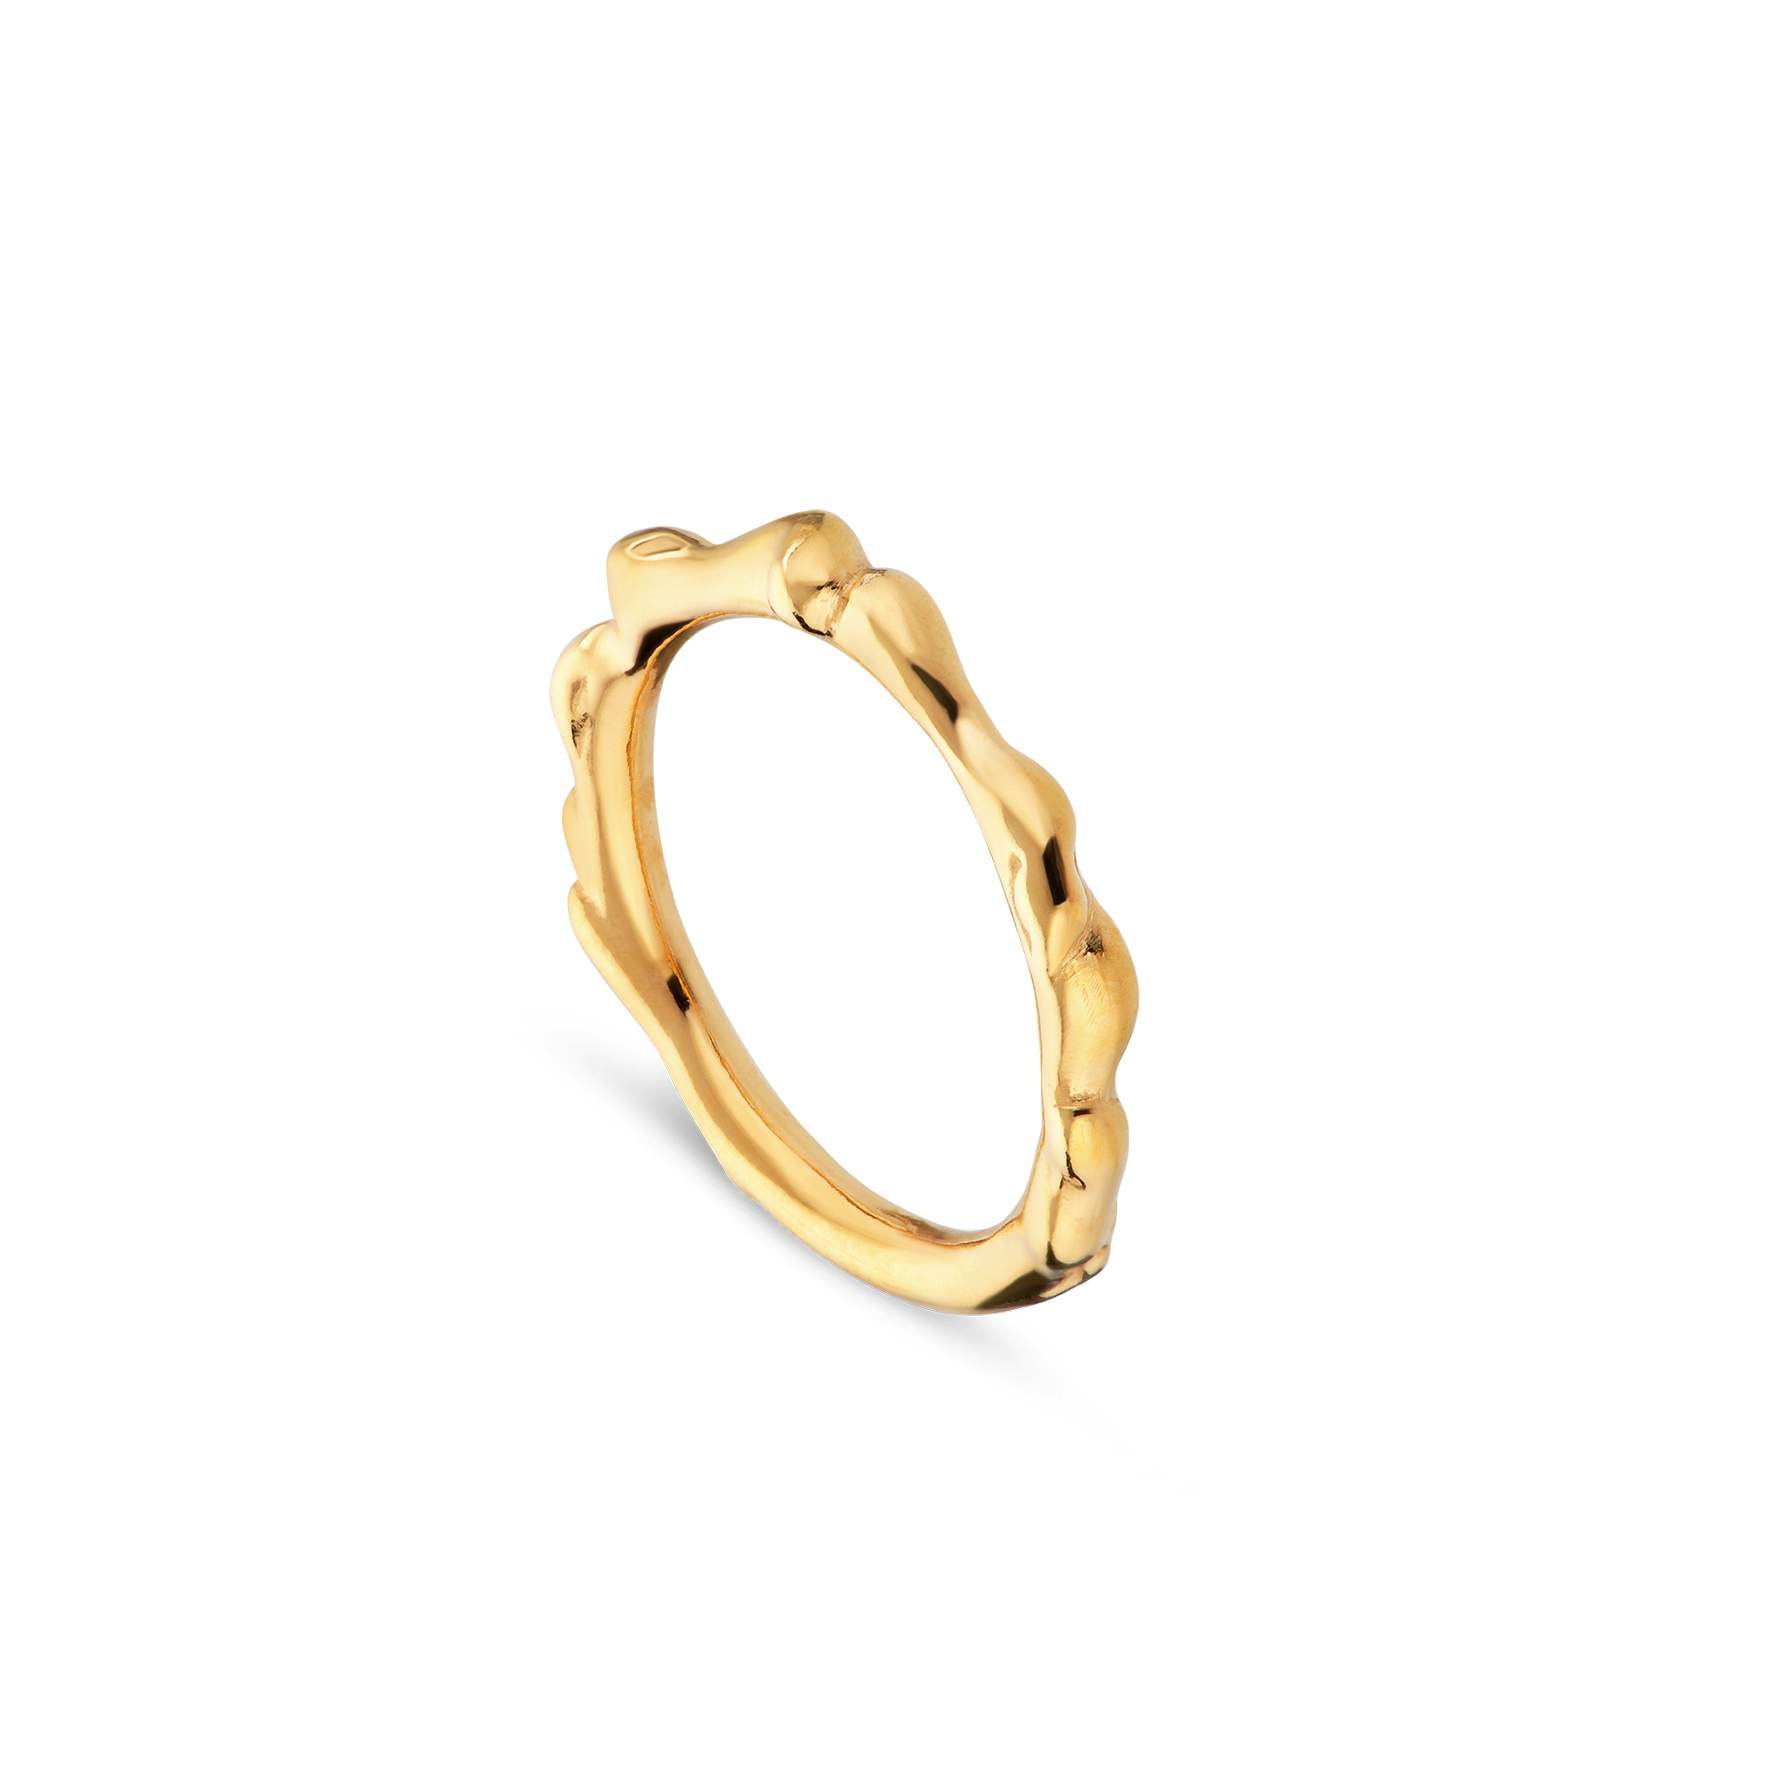 Drippy Ring from Jane Kønig in Goldplated-Silver Sterling 925